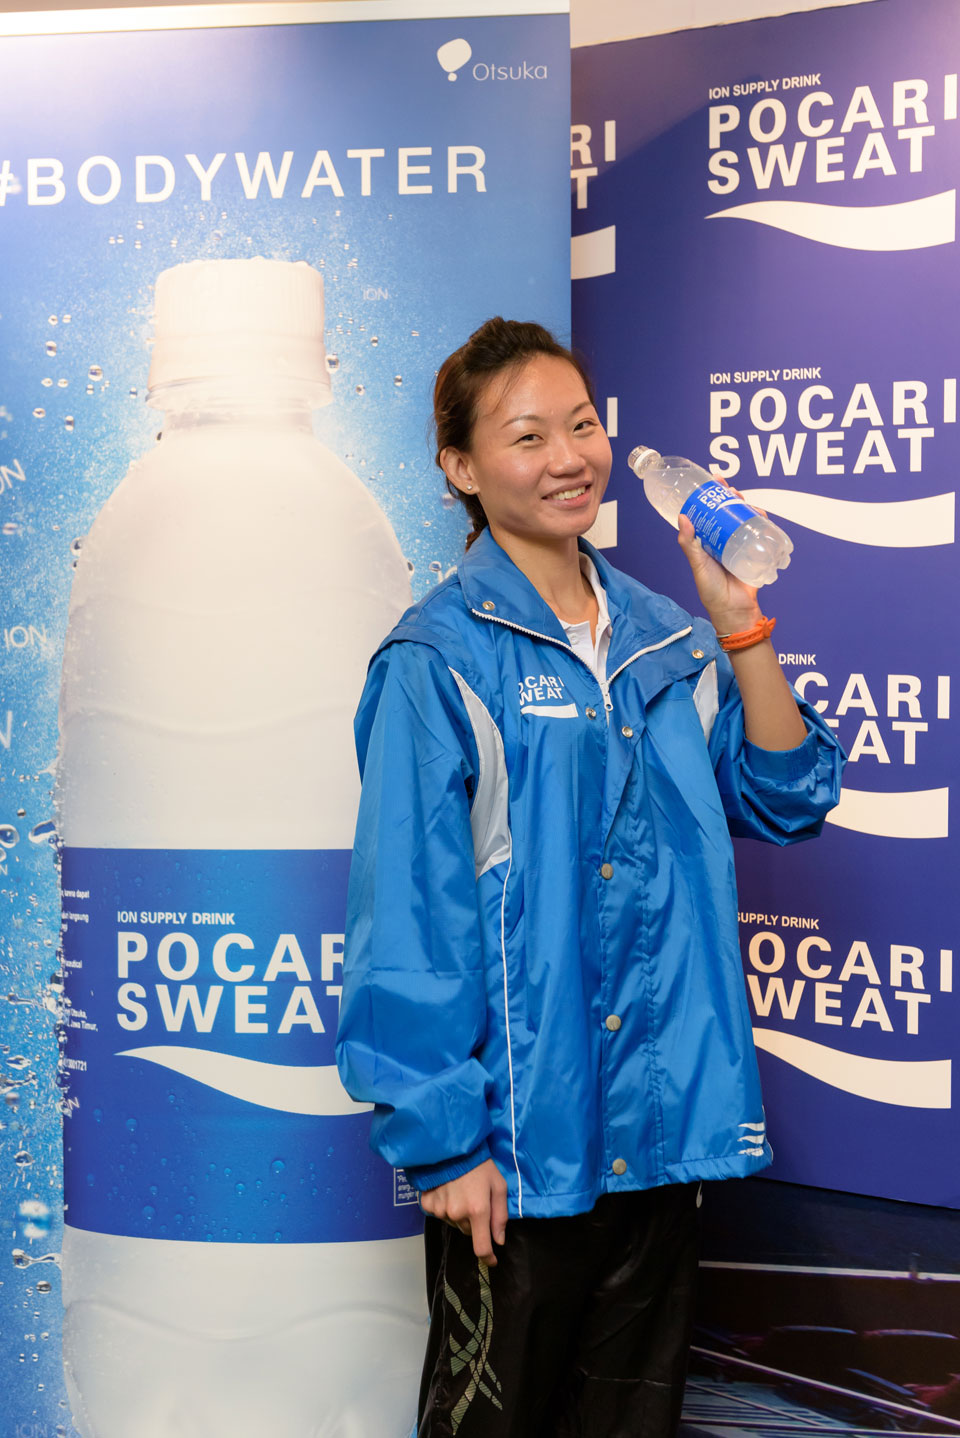 Pocari Sweat Gives Olympic-Bound Marathoner Neo Jie Shi a Timely Boost